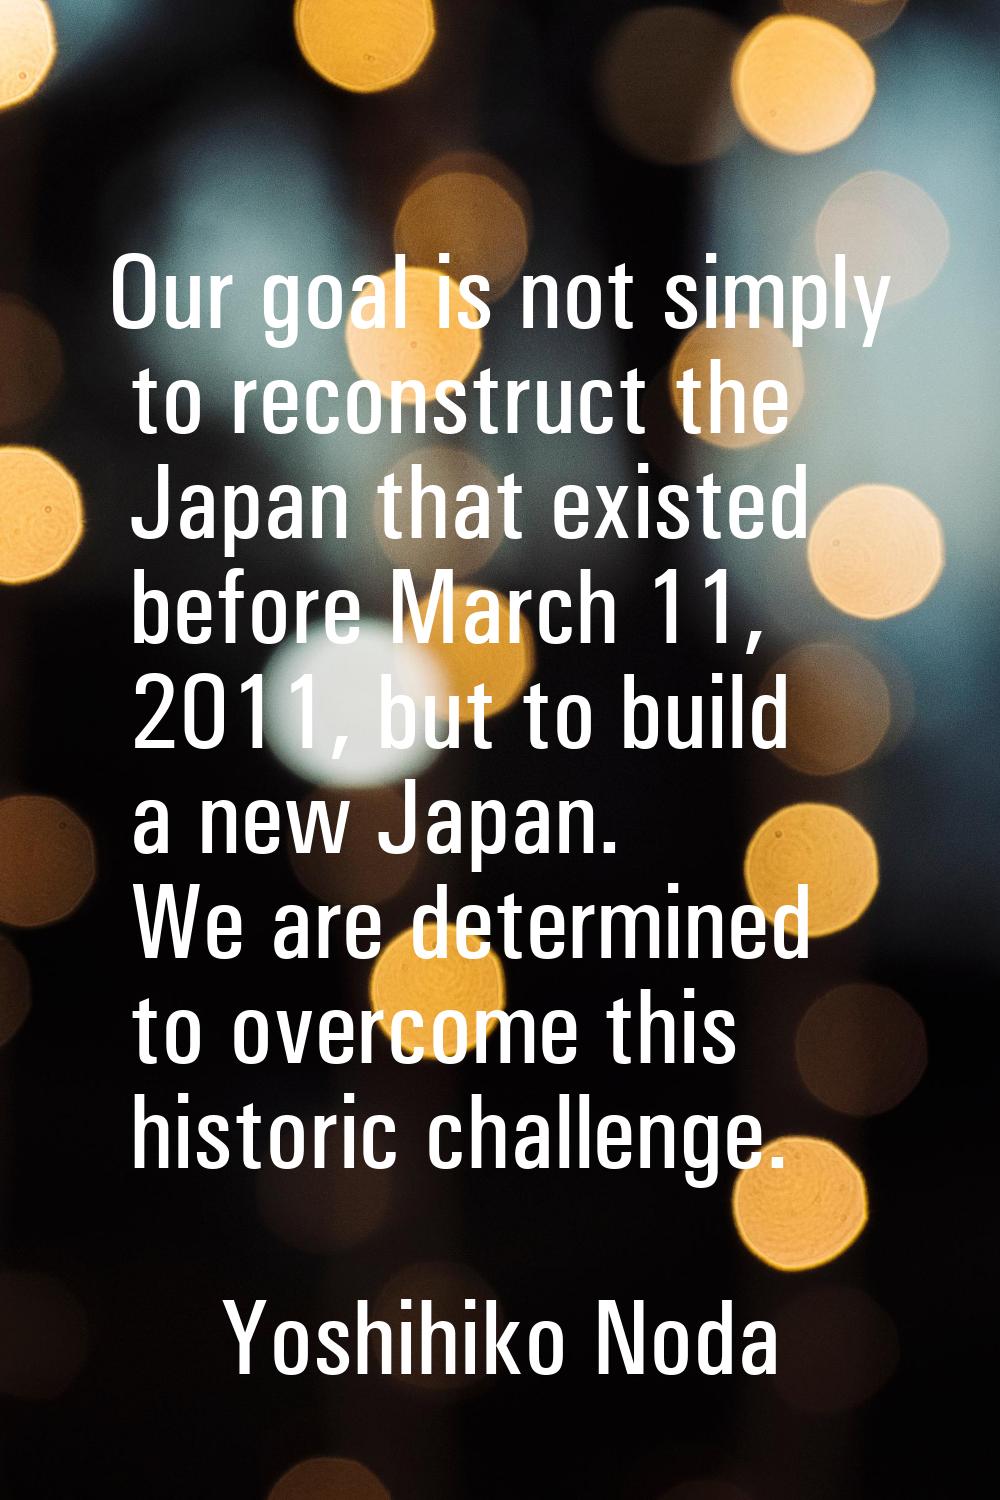 Our goal is not simply to reconstruct the Japan that existed before March 11, 2011, but to build a 